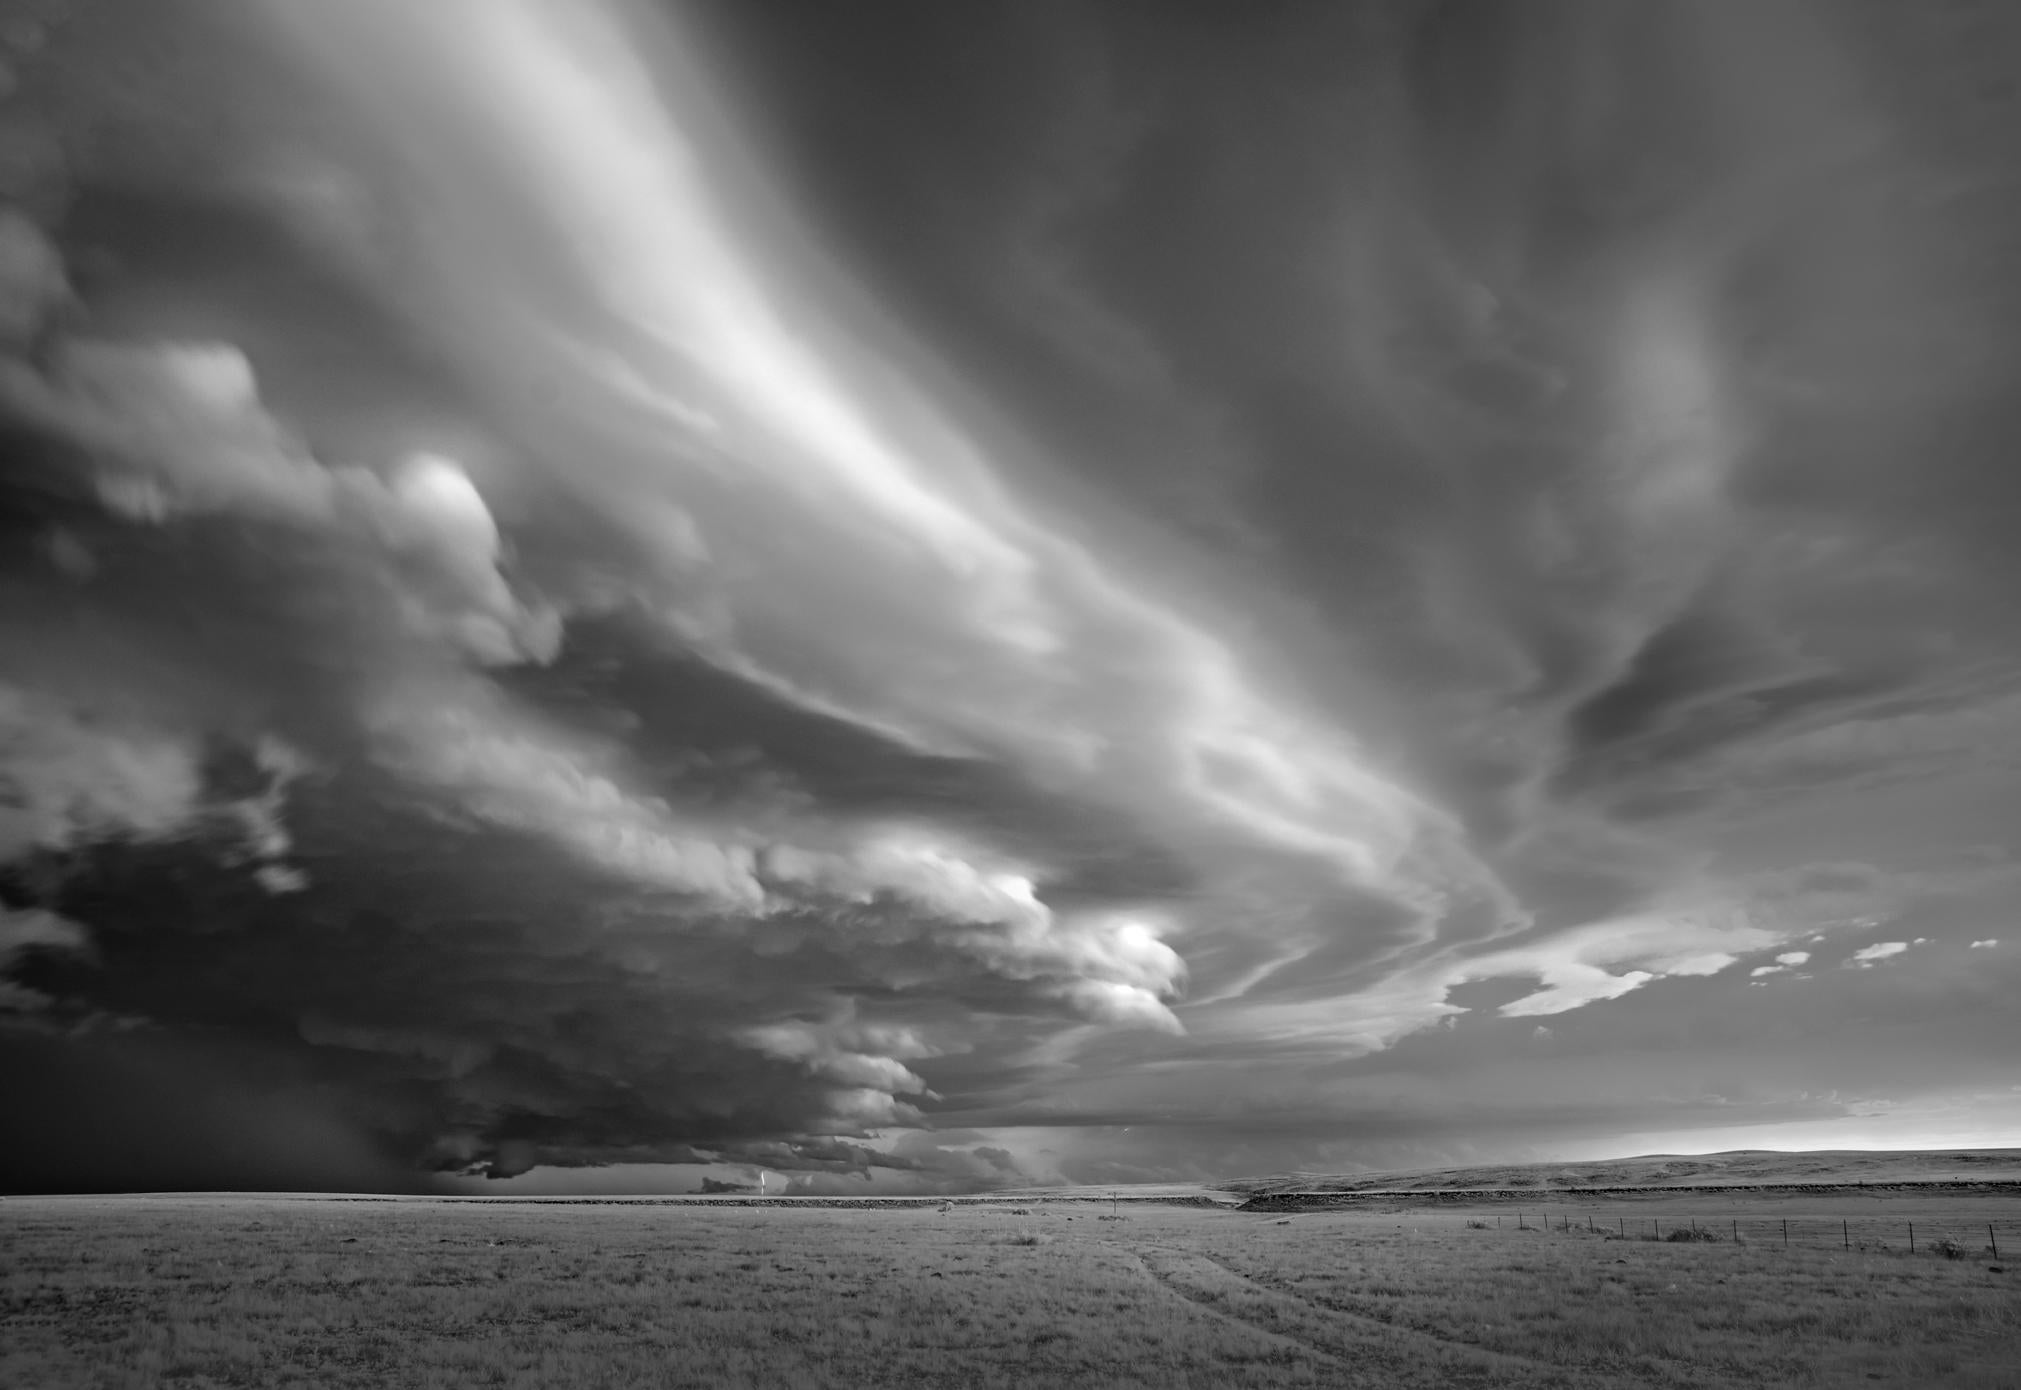 Mitch Dobrowner Landscape Photograph - Supercell Swirls and Lightning, limited edition photograph, signed and numbered 